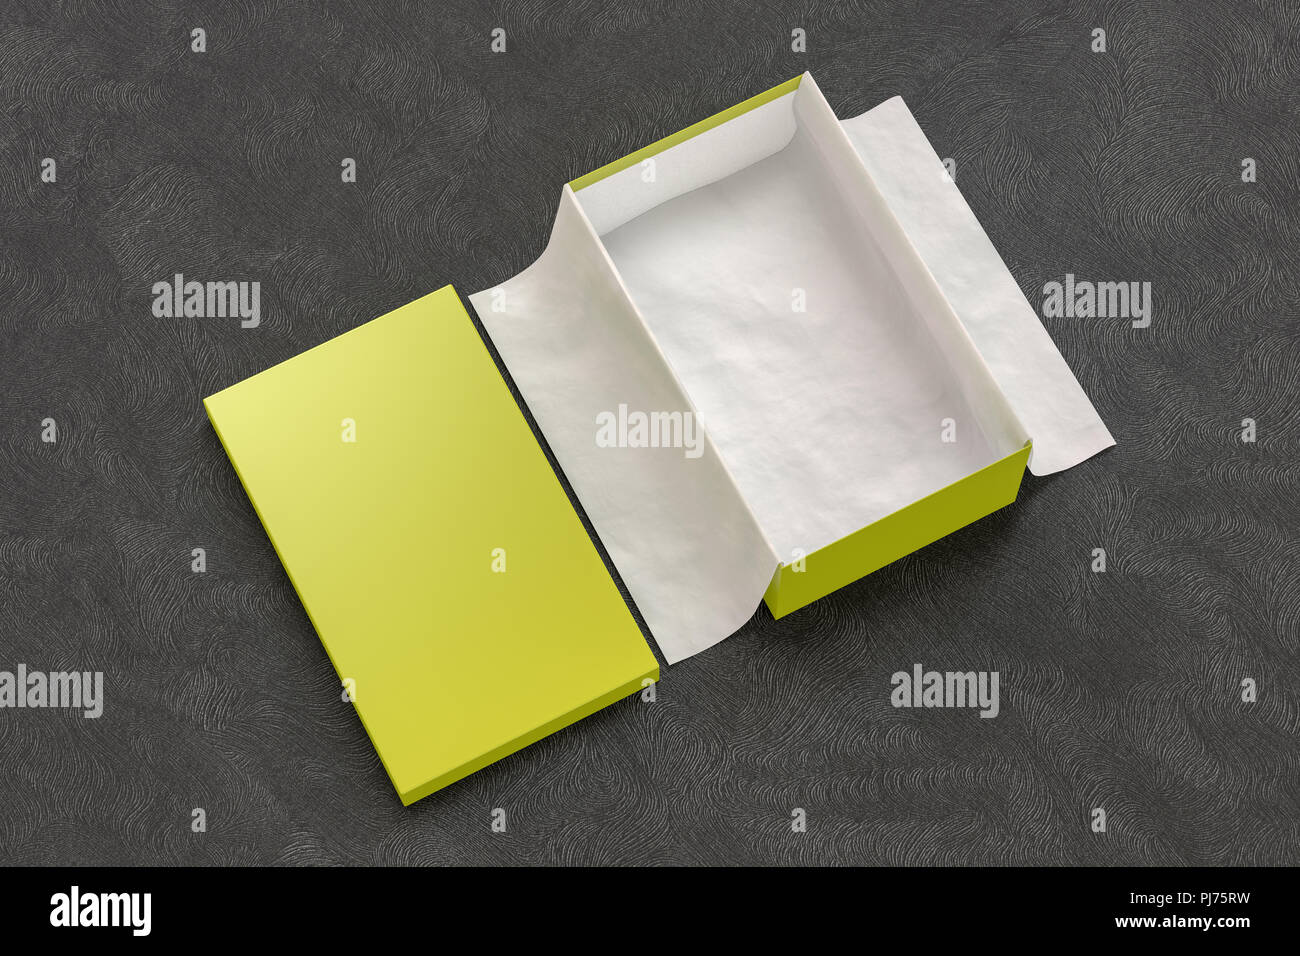 Download Opened Yellow Shoe Box Container On Black Background With Wrapping Paper Packaging Mockup 3d Illustration Stock Photo Alamy Yellowimages Mockups